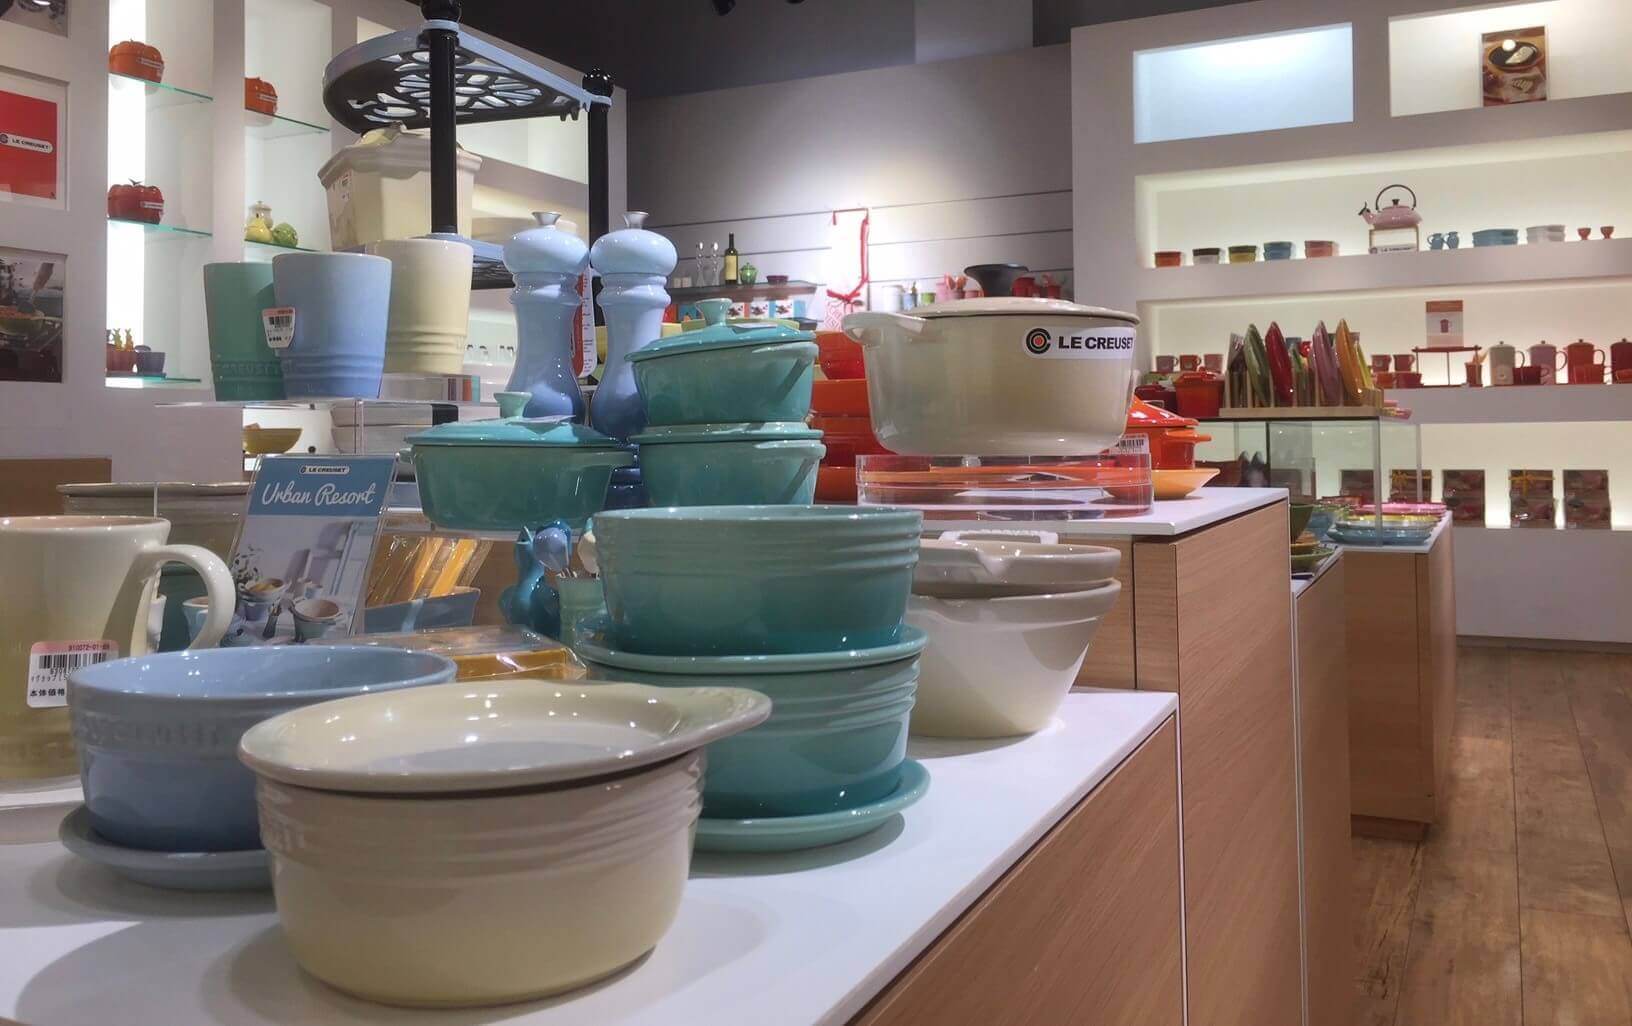 le creuset clearance store